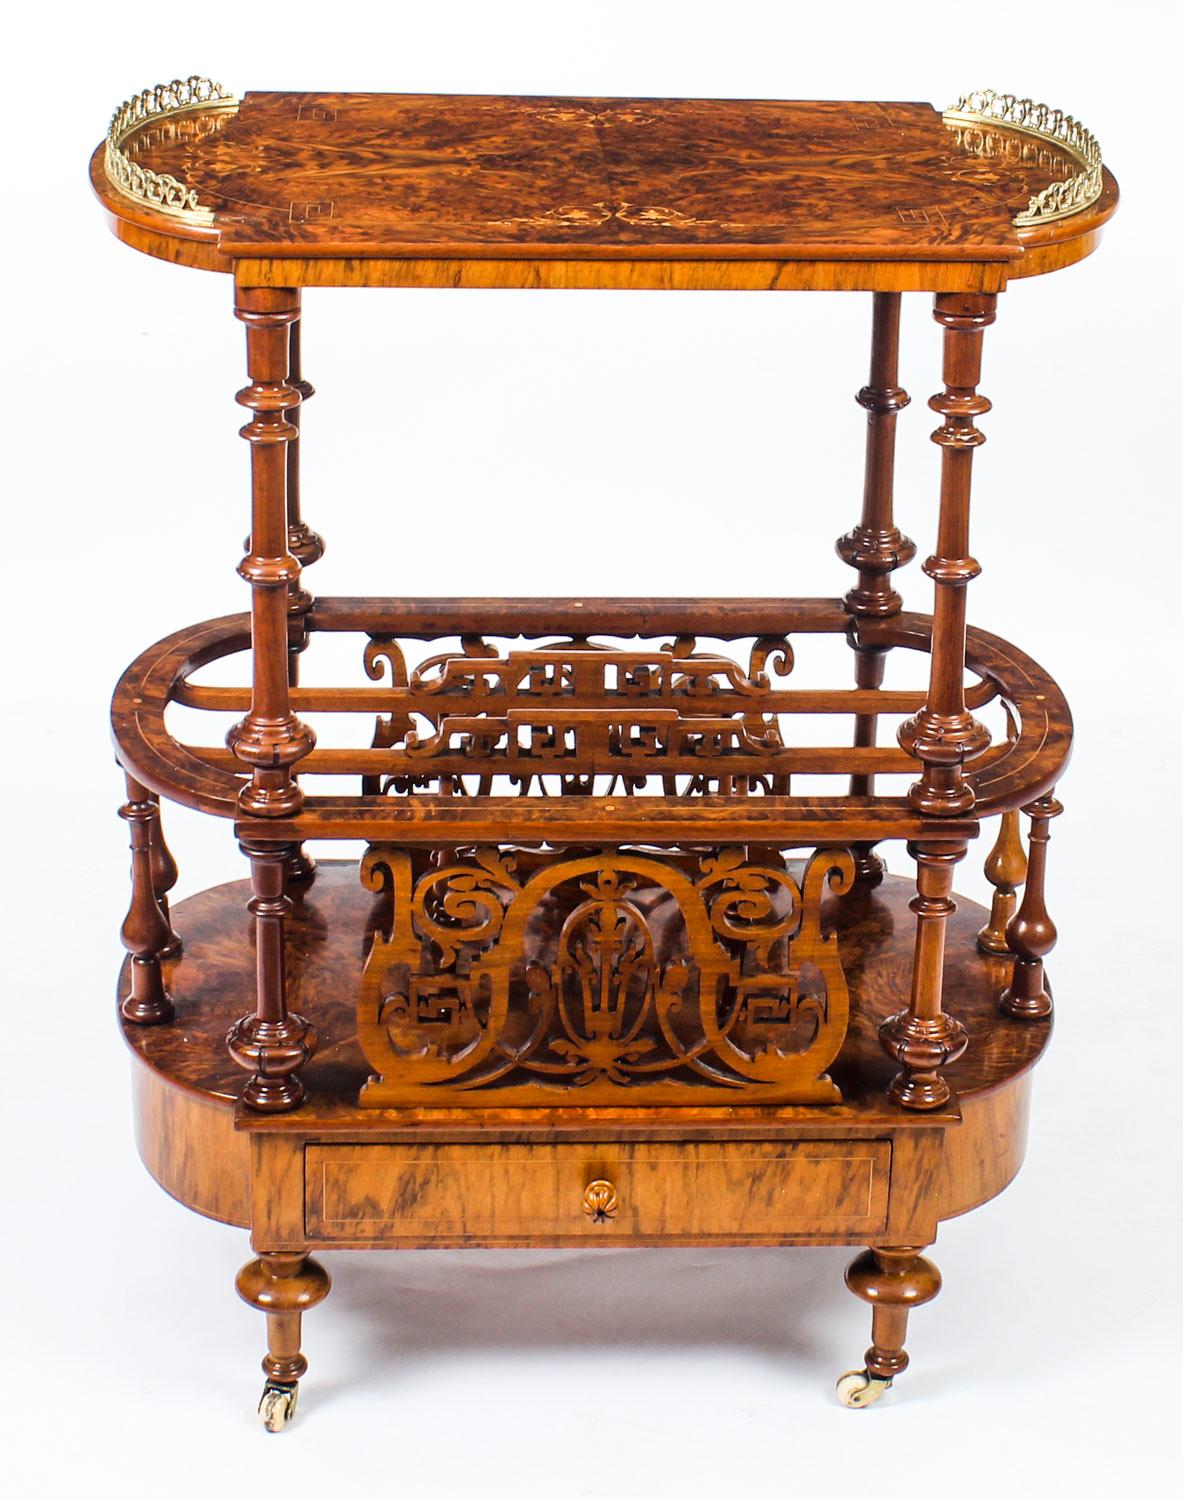 This is a gorgeous antique Victorian burr walnut and marquetry Canterbury circa 1870 in date. 

The grain of the burr walnut and the inlaid marquetry are truly beautiful, the solid walnut fret carved sides and dividers are a masterpiece of the